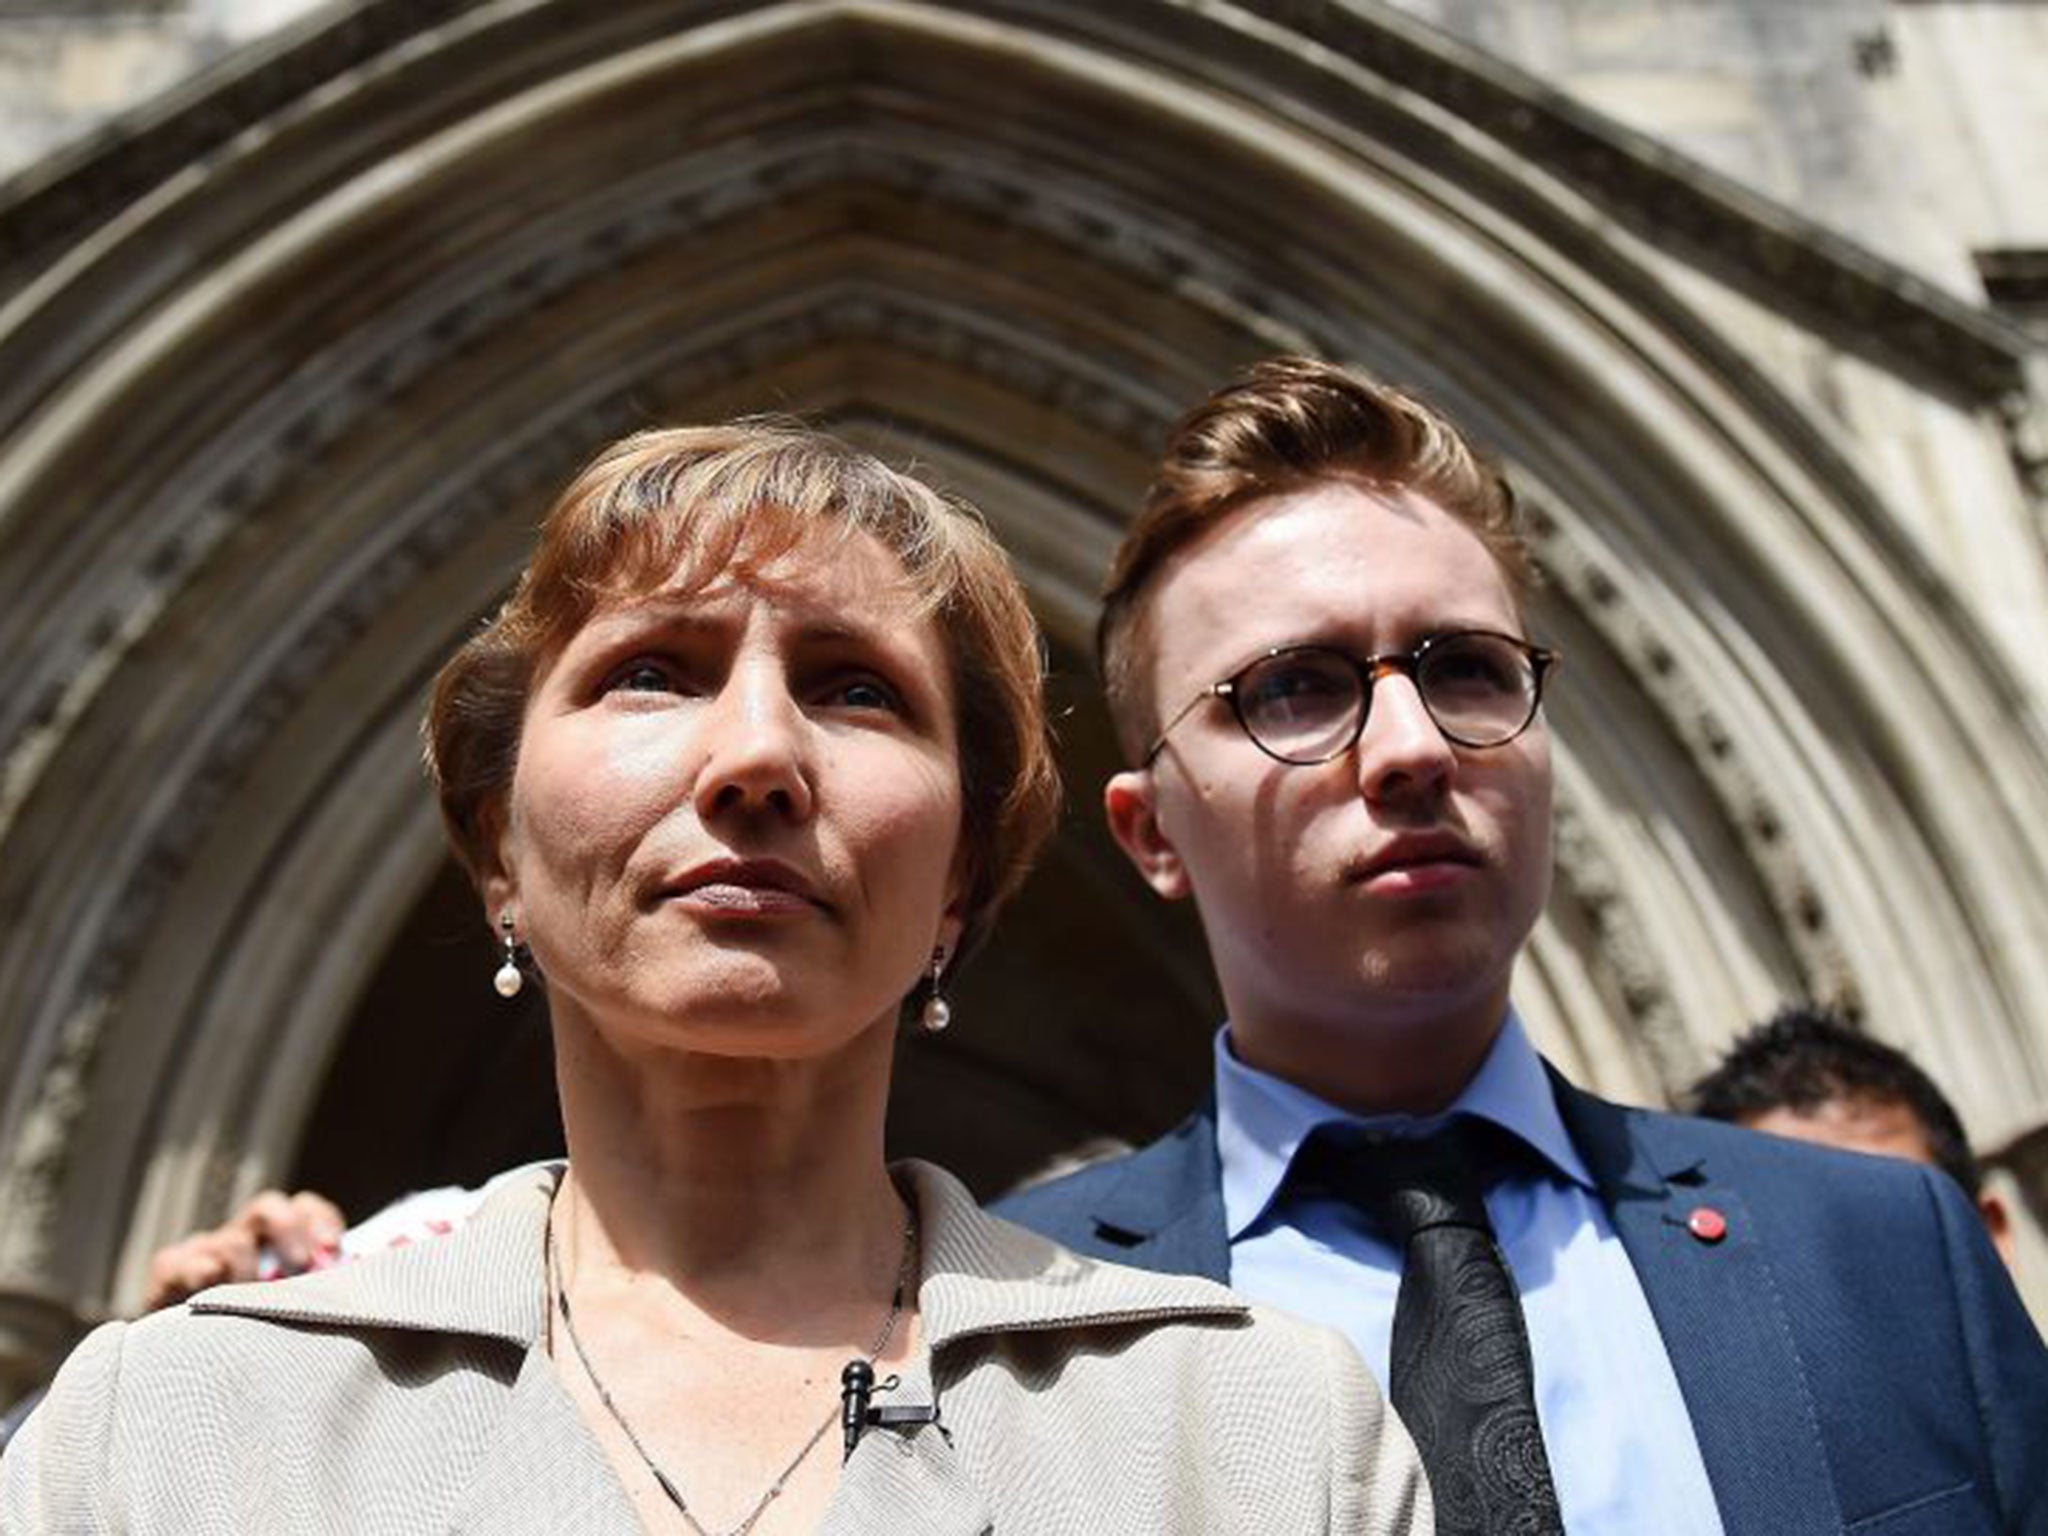 Marina Litvinenko, widow of Alexander Litvinenko, and son Anatoly, makes a statement outside the High Court in London, Britain, 31 July 2015